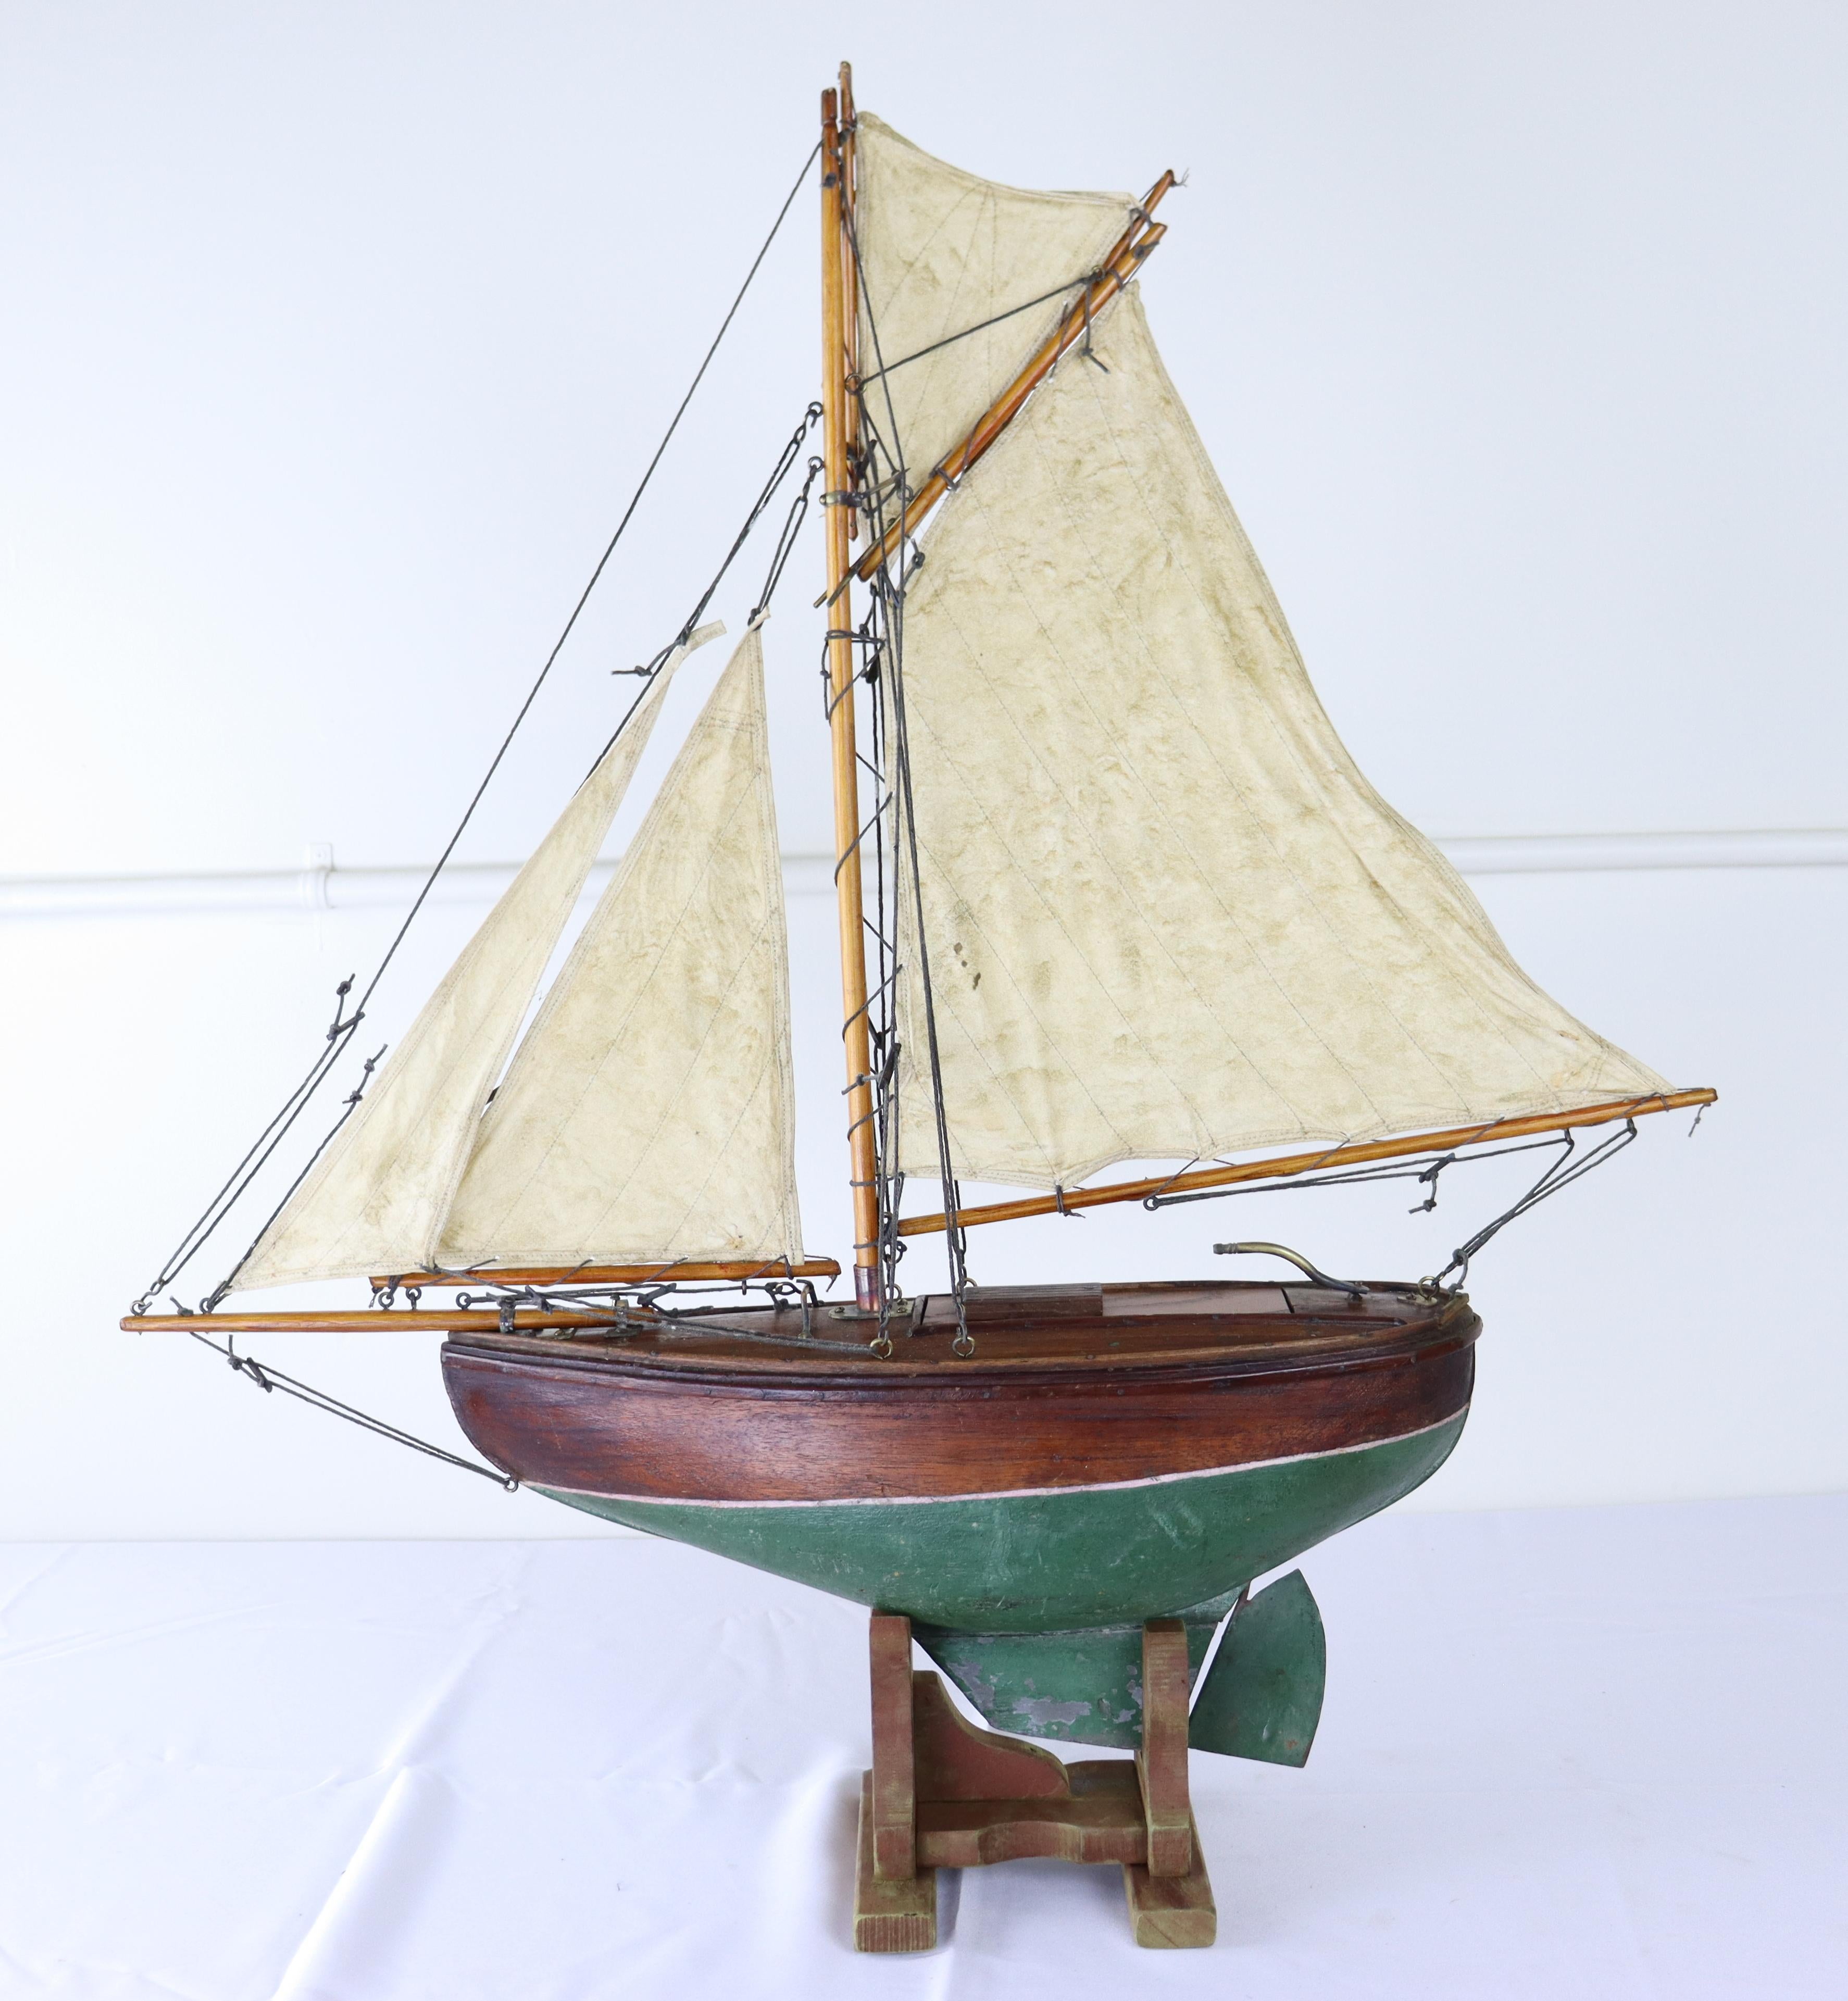 A charming vintage model yacht with sails made from old sail cloth and original brass accents. Stand is recent to hold the ship upright and stabile.  Measurements include the stand.  Heavier and more substantial than other pond yachts we have seen.